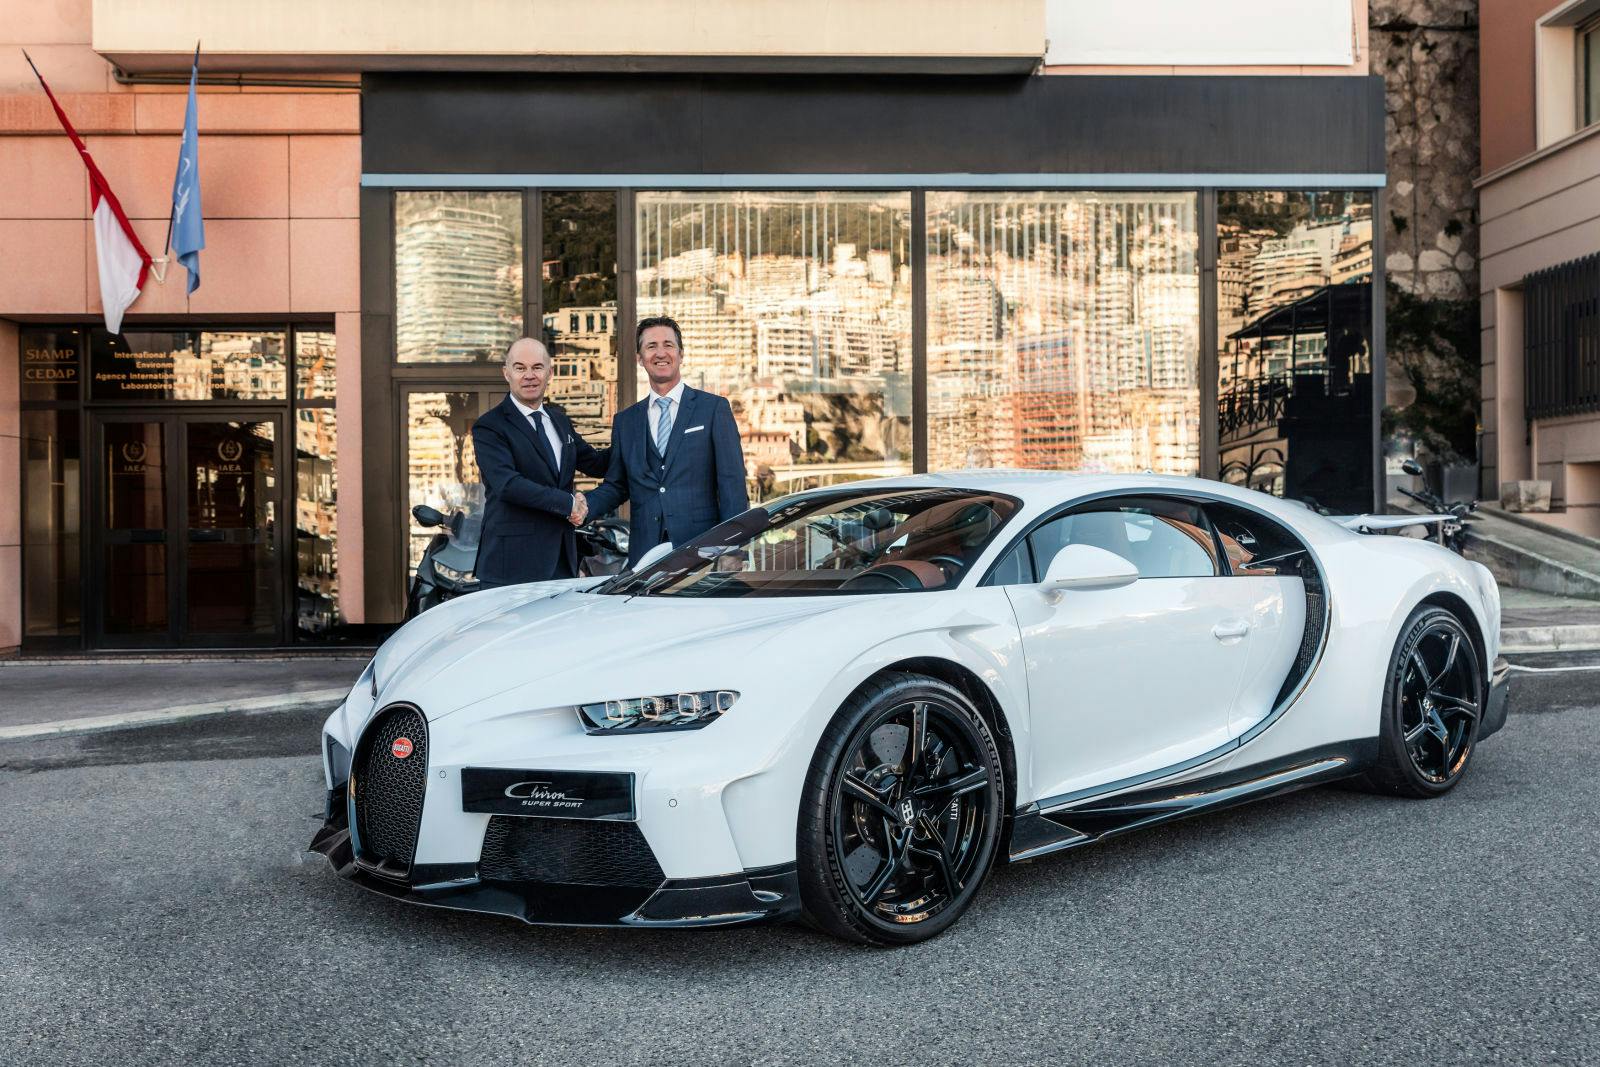 Guy Caquelin, Bugatti’s Regional Director of Europe and Stéphane Colmart, Directeur Général of Group Segond Automobile with the Chiron Super Sport in front of the soon to be Bugatti Showroom in Monaco.